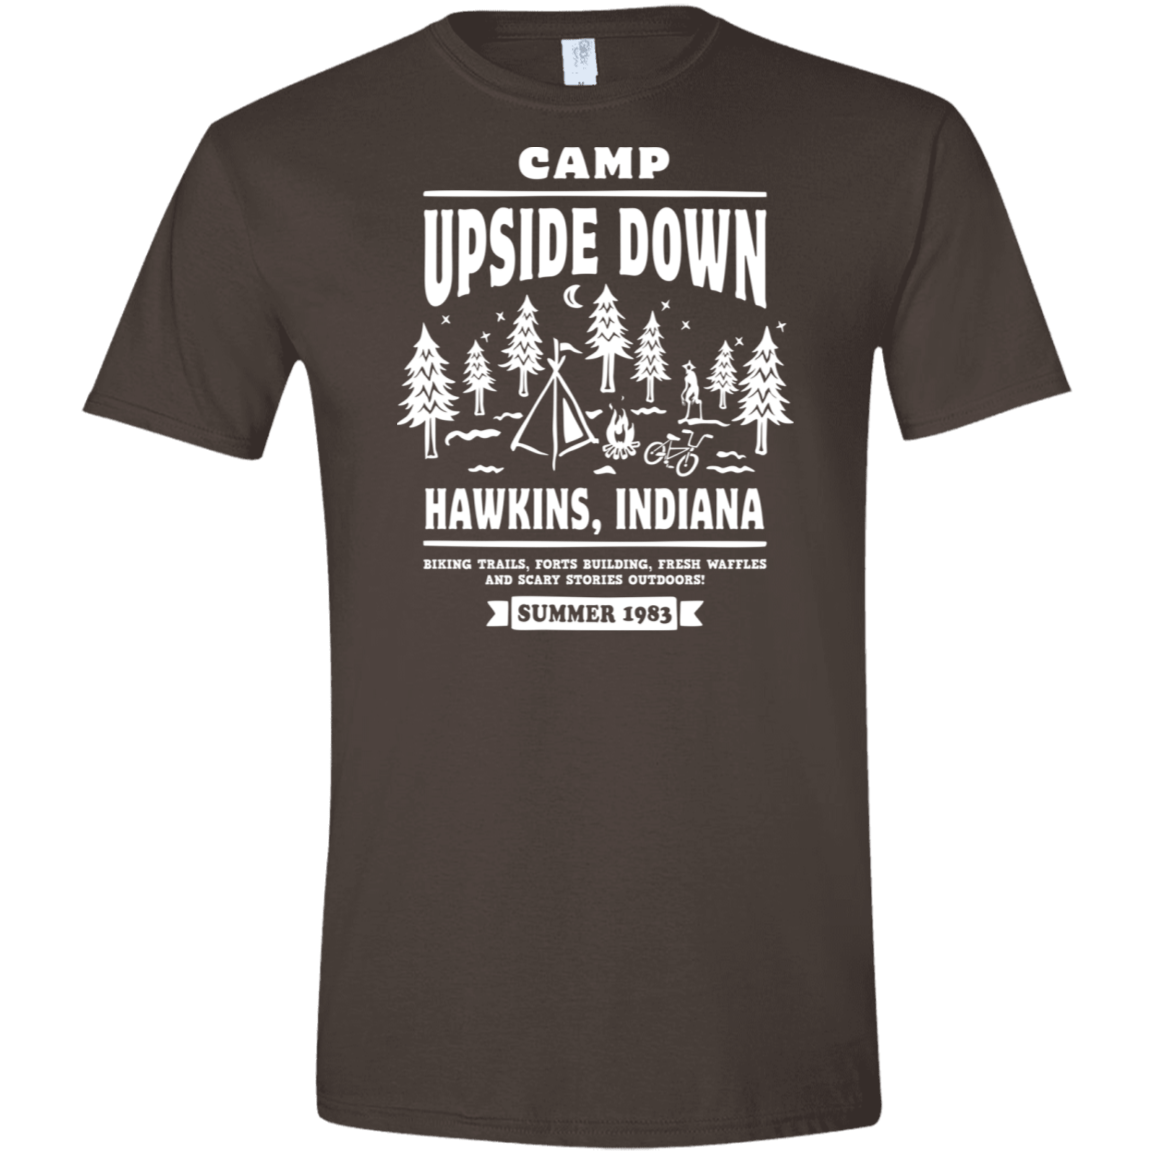 T-Shirts Dark Chocolate / S Camp Upside Down Men's Semi-Fitted Softstyle